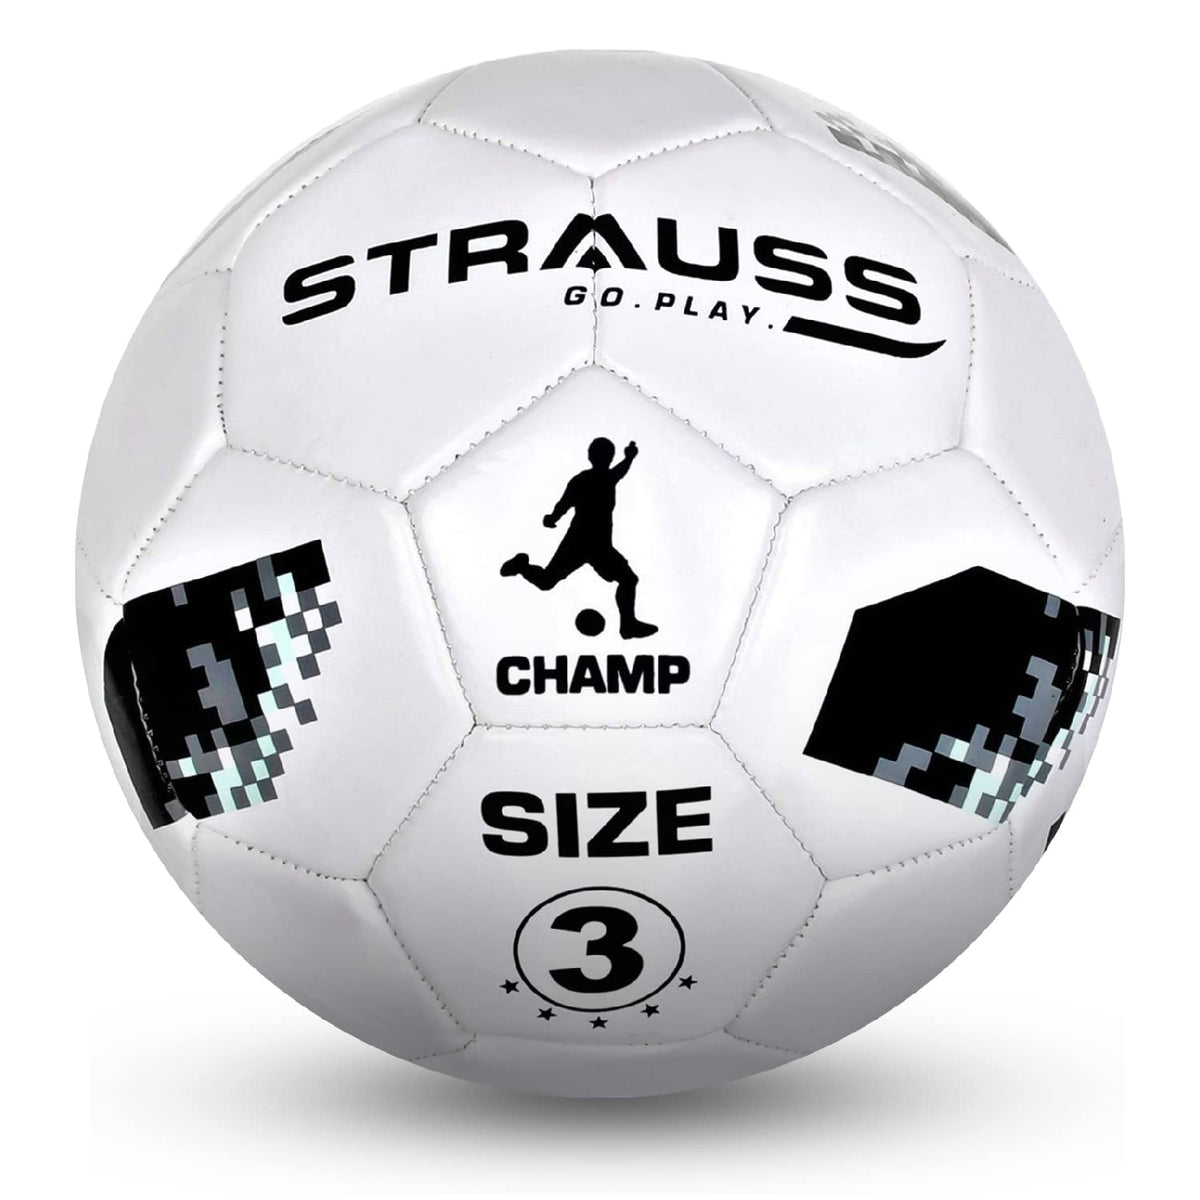 Strauss Official Basketball Size 3 | Professional Match Ball for Indoor & Outdoor Games & Training for Kids & Adults | Superior & Soft Grip with Granular Texture & High-Performance Grained Rubber Surface, (White)